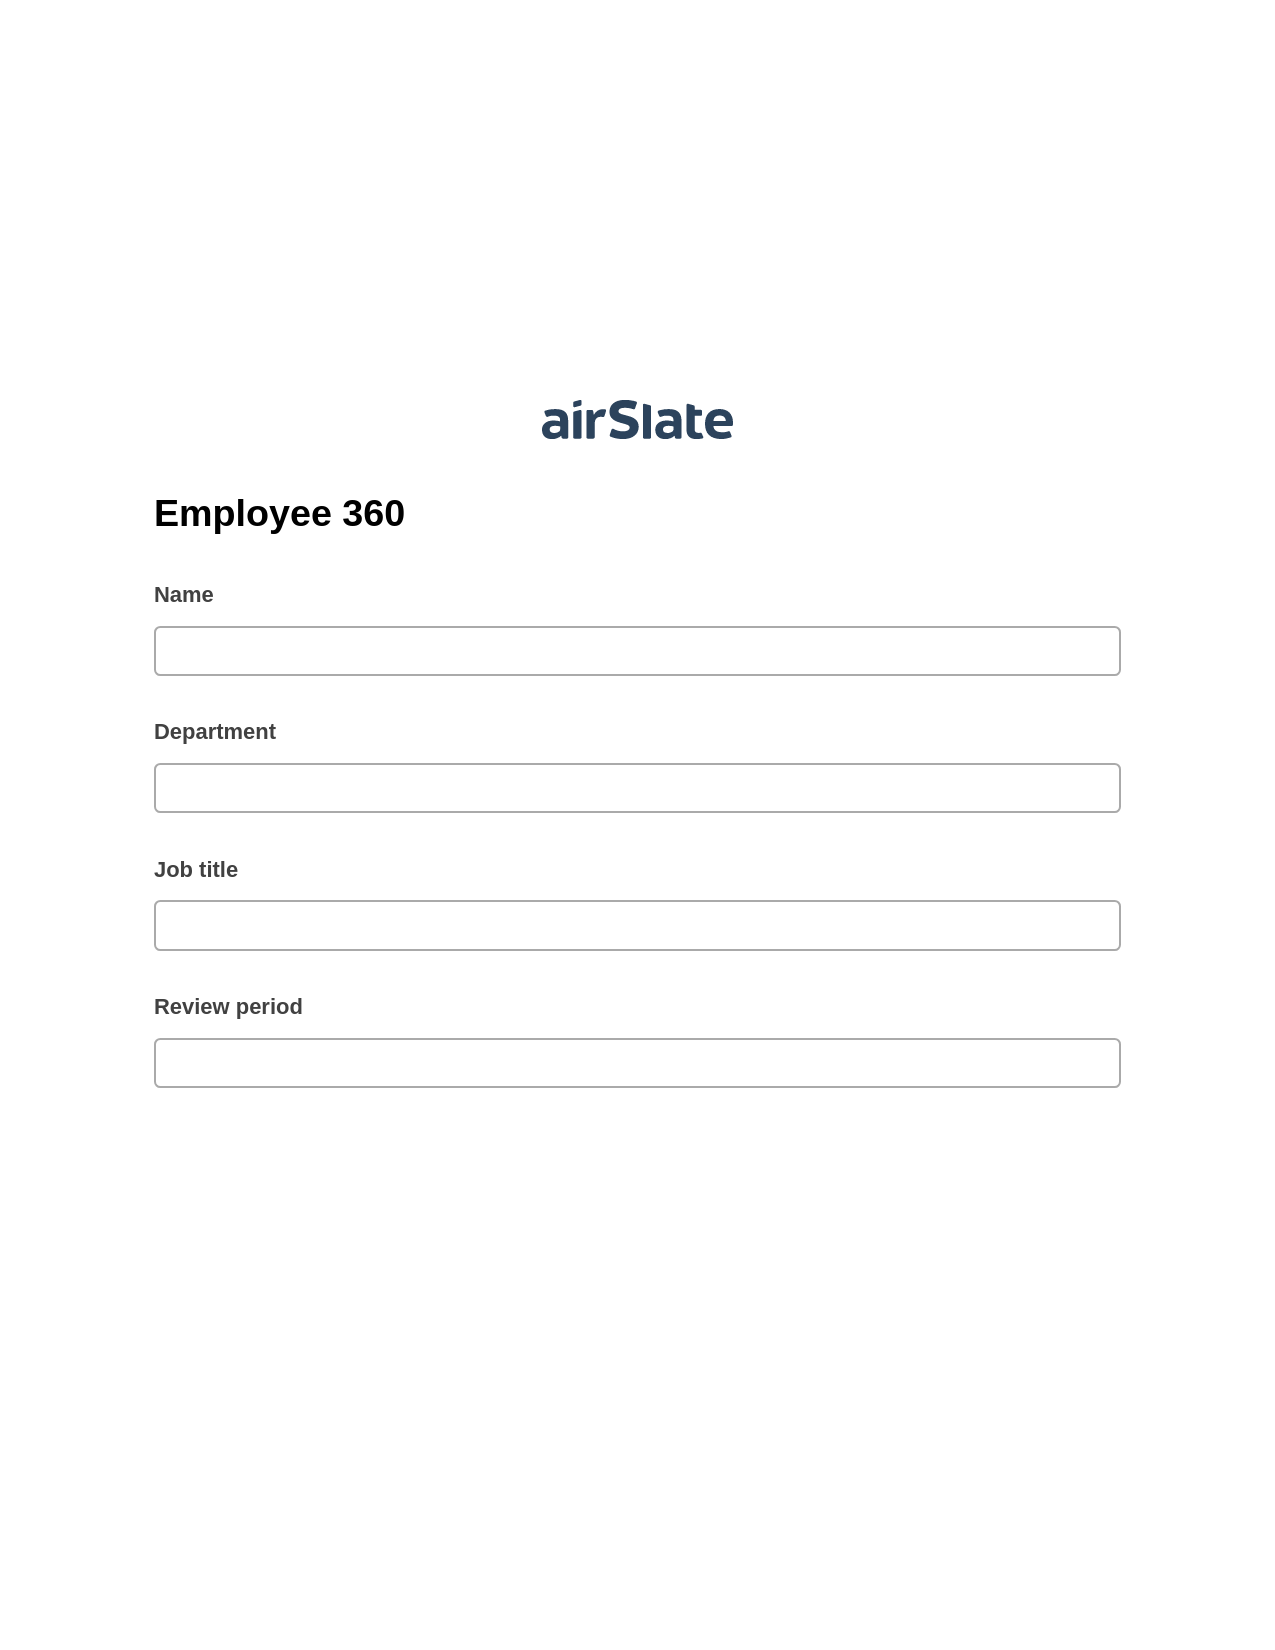 Employee 360 Pre-fill from another Slate Bot, Create MS Dynamics 365 Records Bot, Archive to SharePoint Folder Bot